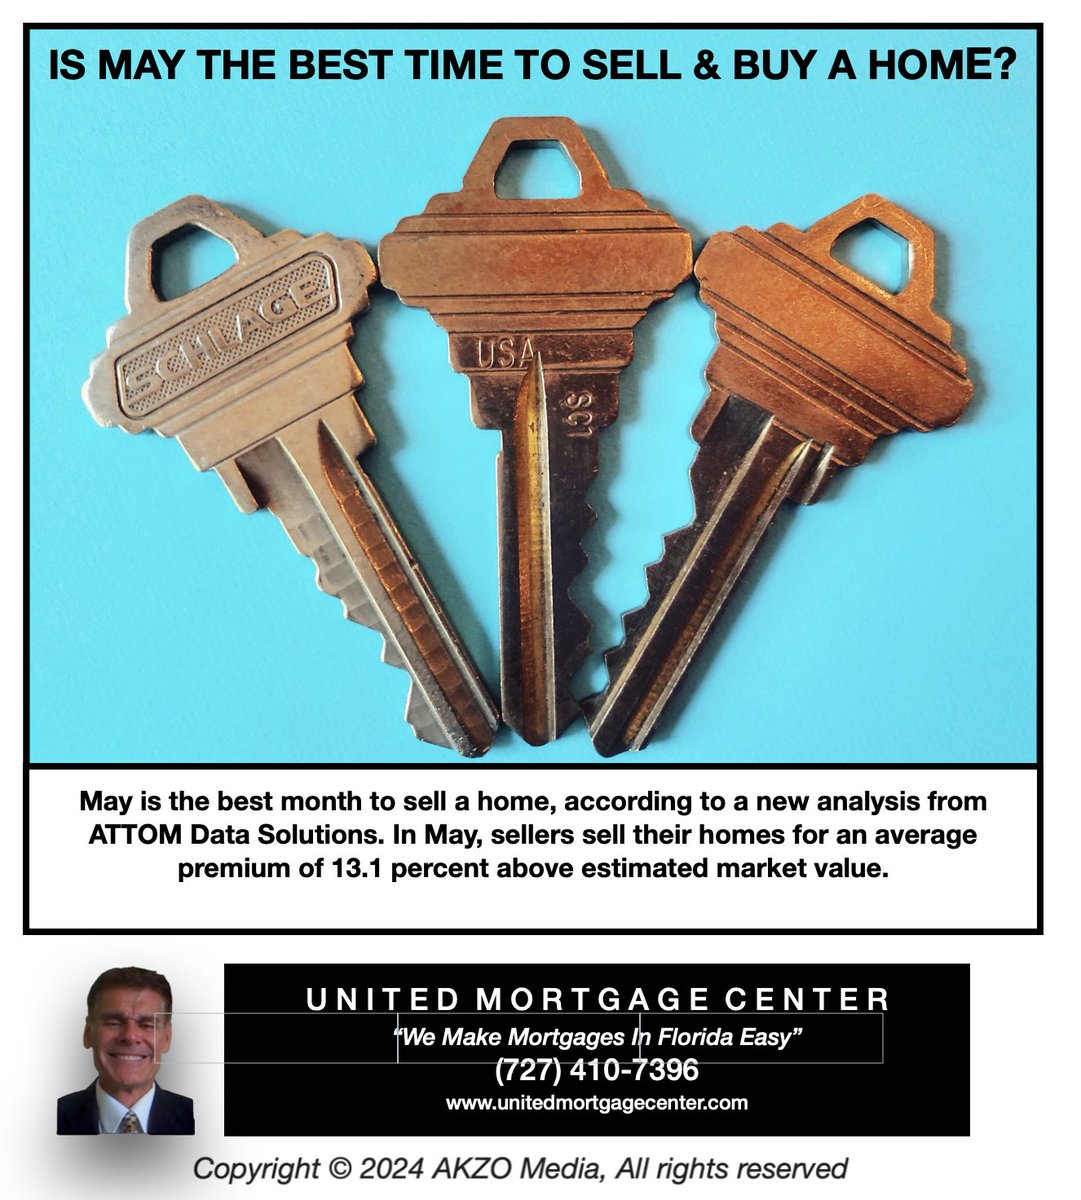 United Mortgage Center-Your Zero Down 1st Time Home Loan
Specialists 'we like making mortgages in Florida easy'
#buy#refi#build#zerodown#1sttimehomebuyer#greatservice
#callnow#florida#lowrates#mortgages#727-410-7396
#www.unitedmortgagecenter.com